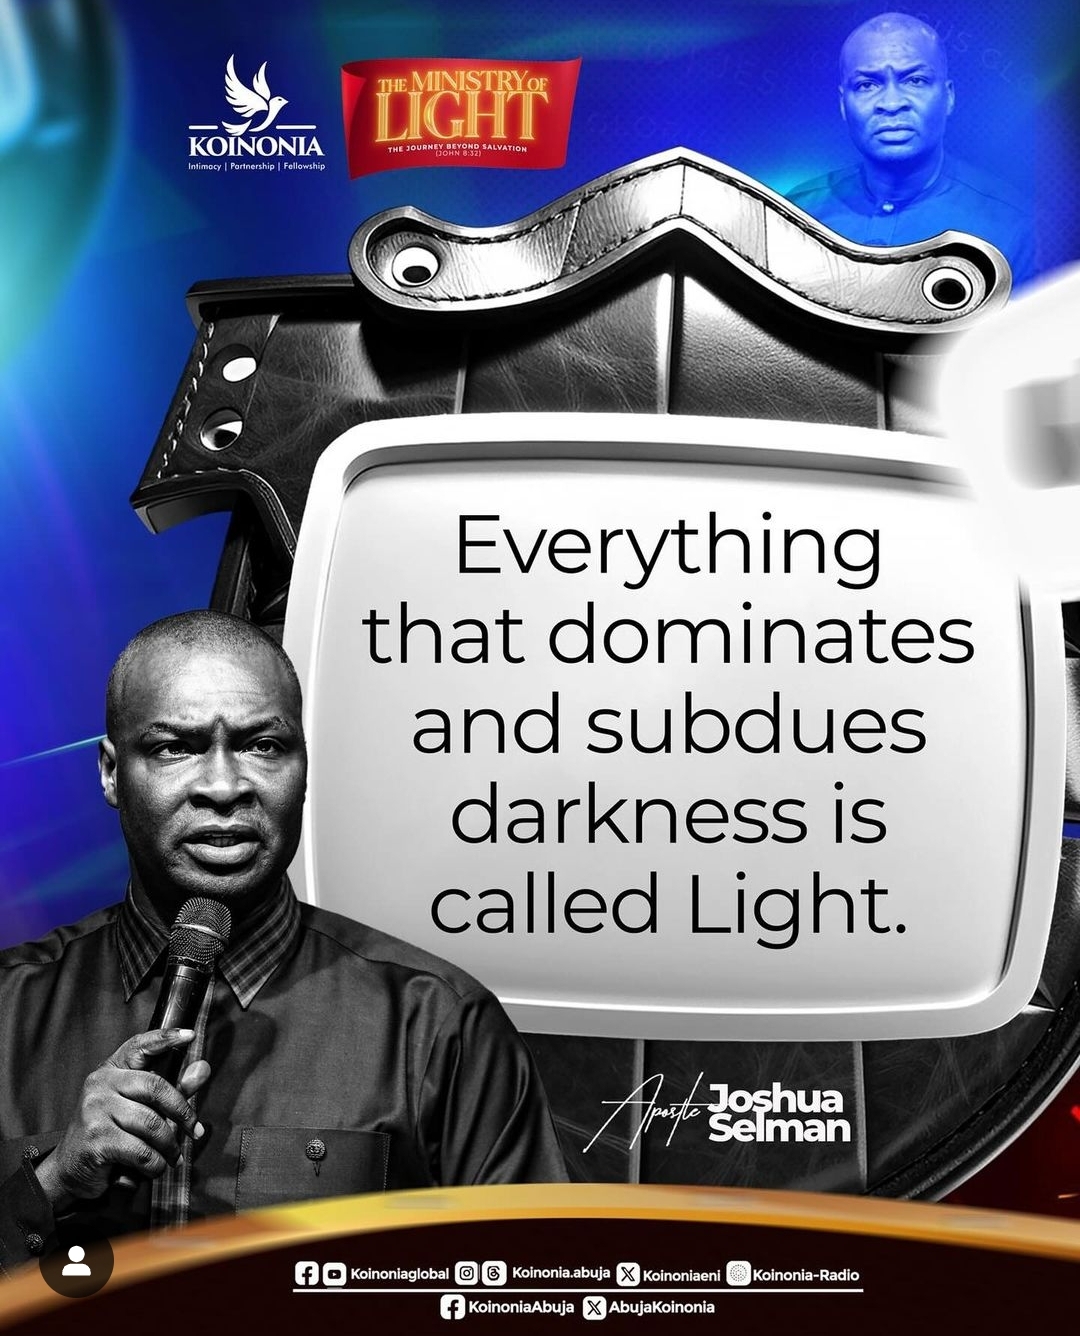 DOWNLOAD MP3: THE MINISTRY OF LIGHT: THE JOURNEY BEYOND SALVATION BY Apostle Joshua Selman 3